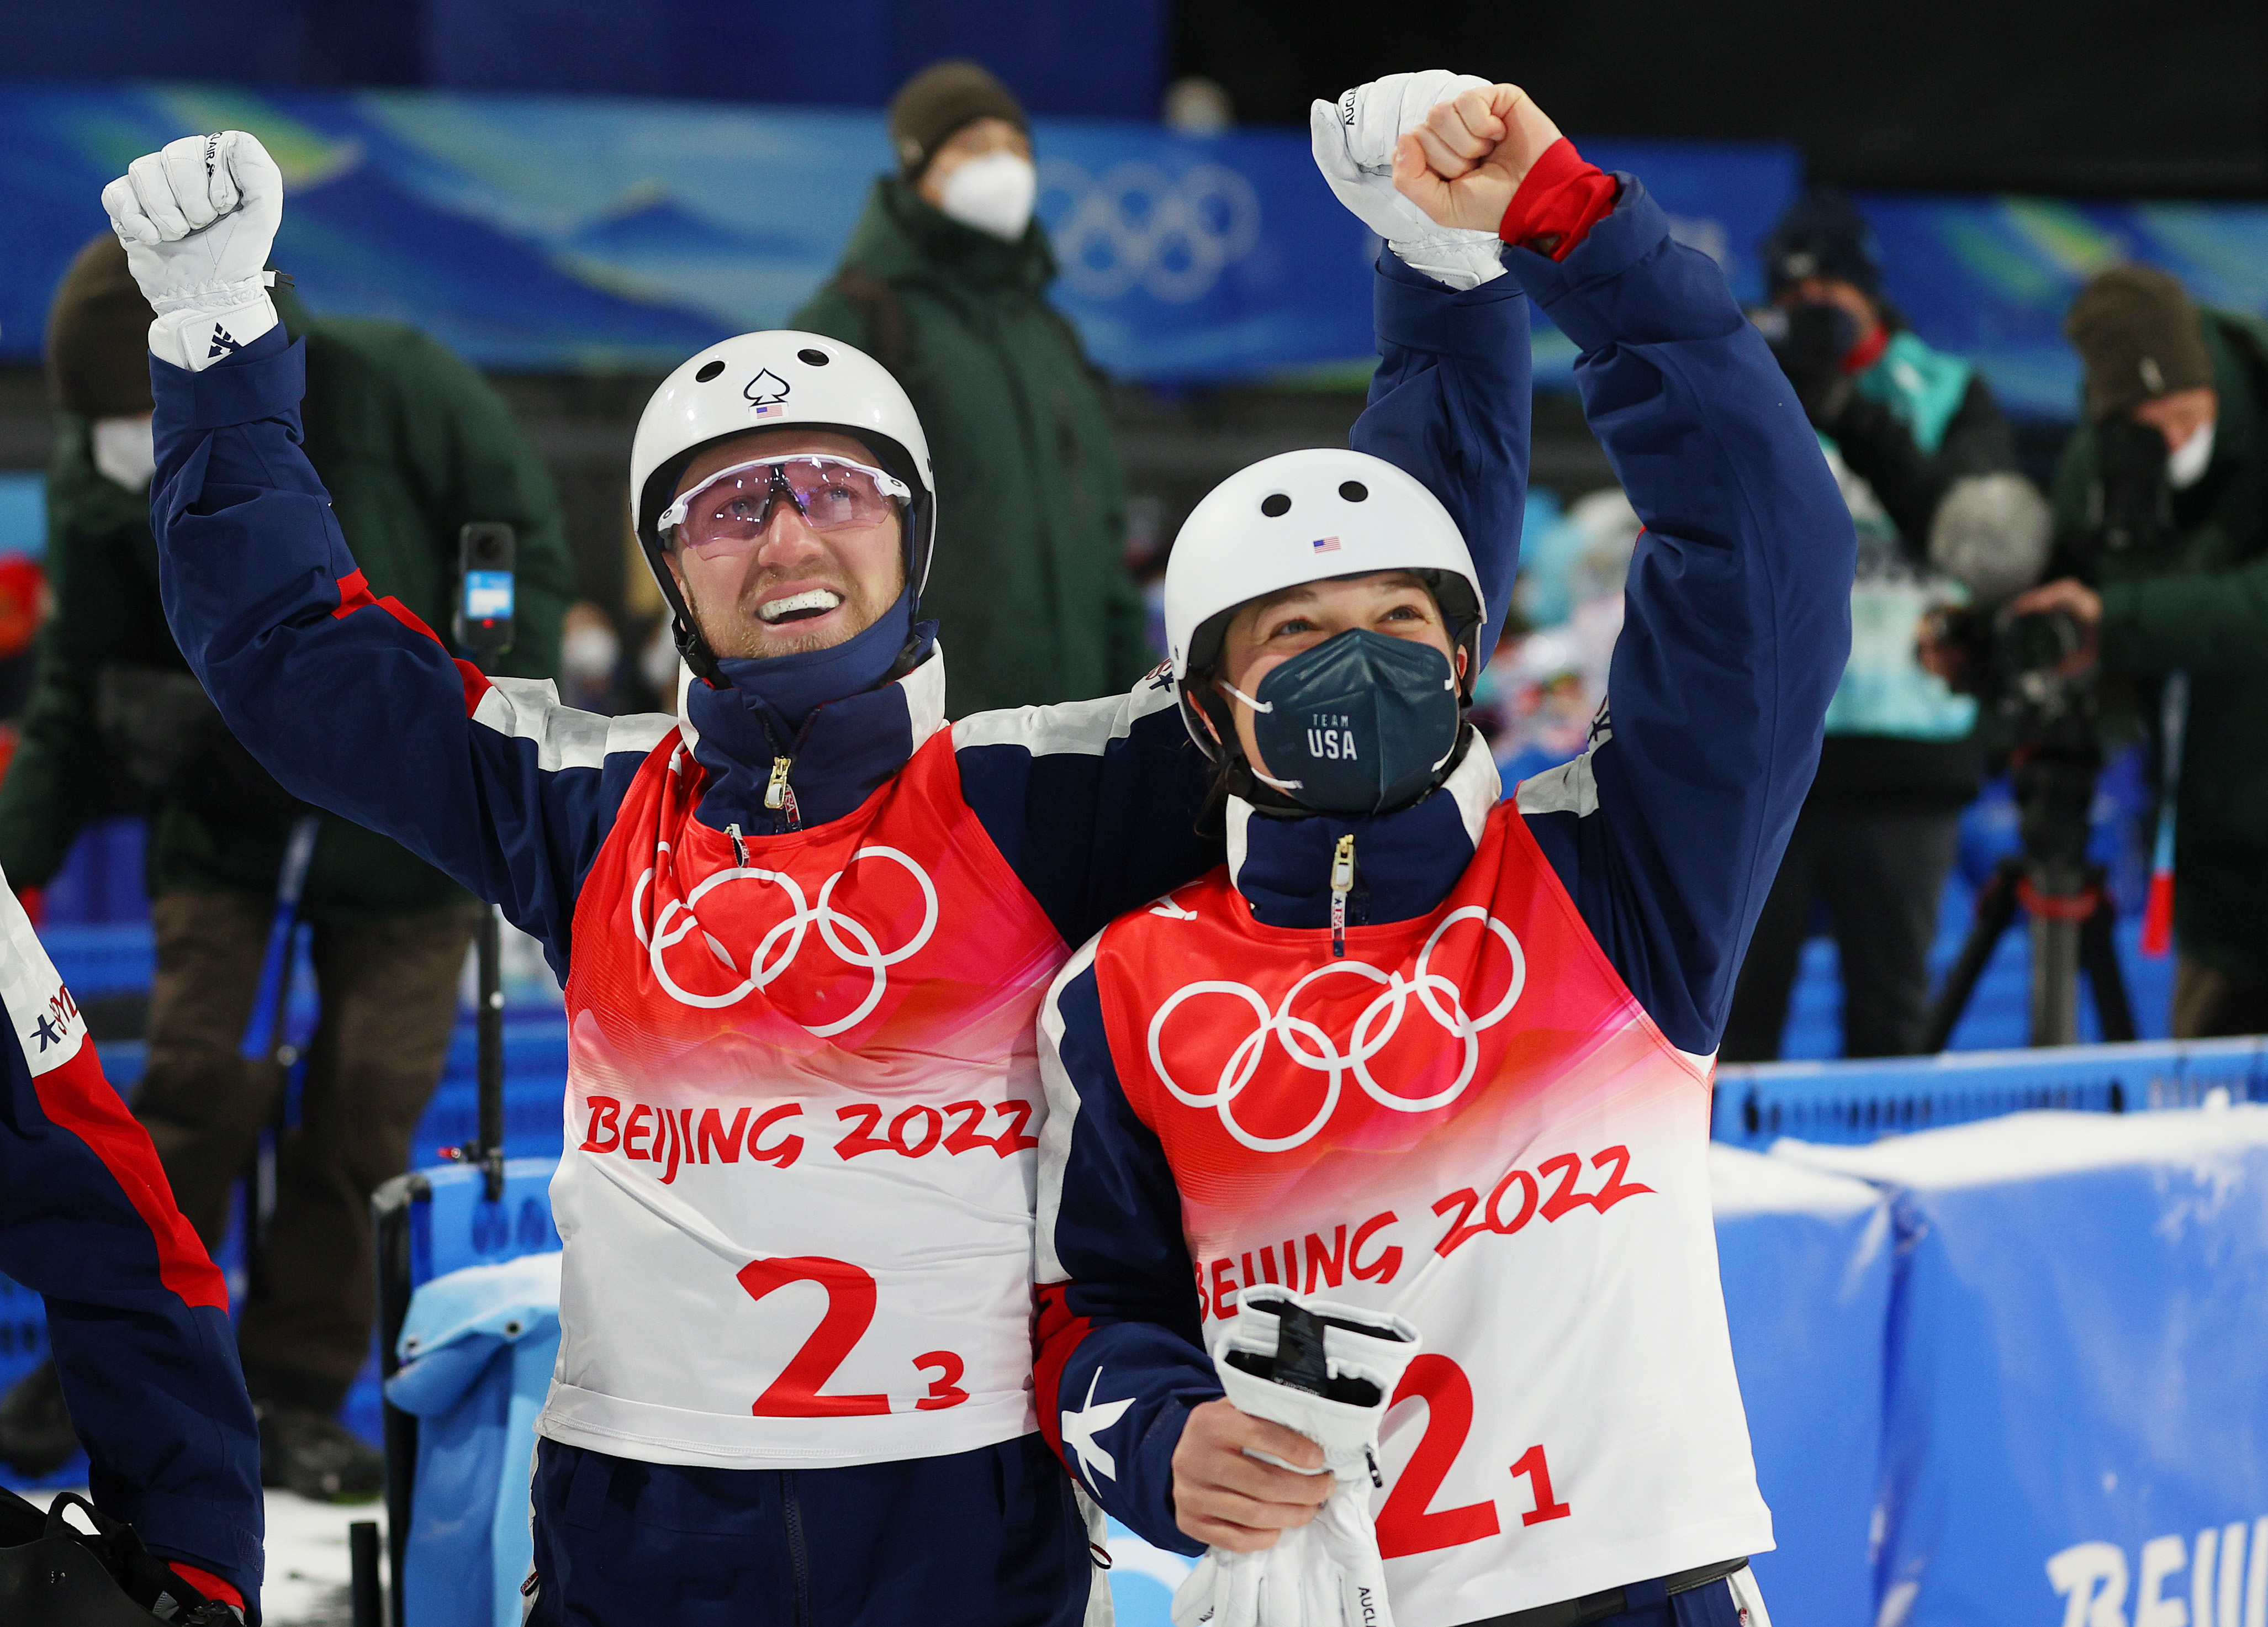 These Olympians Are Dating While Competing Together and Against Each Other in the 2022 Winter Olympic Games